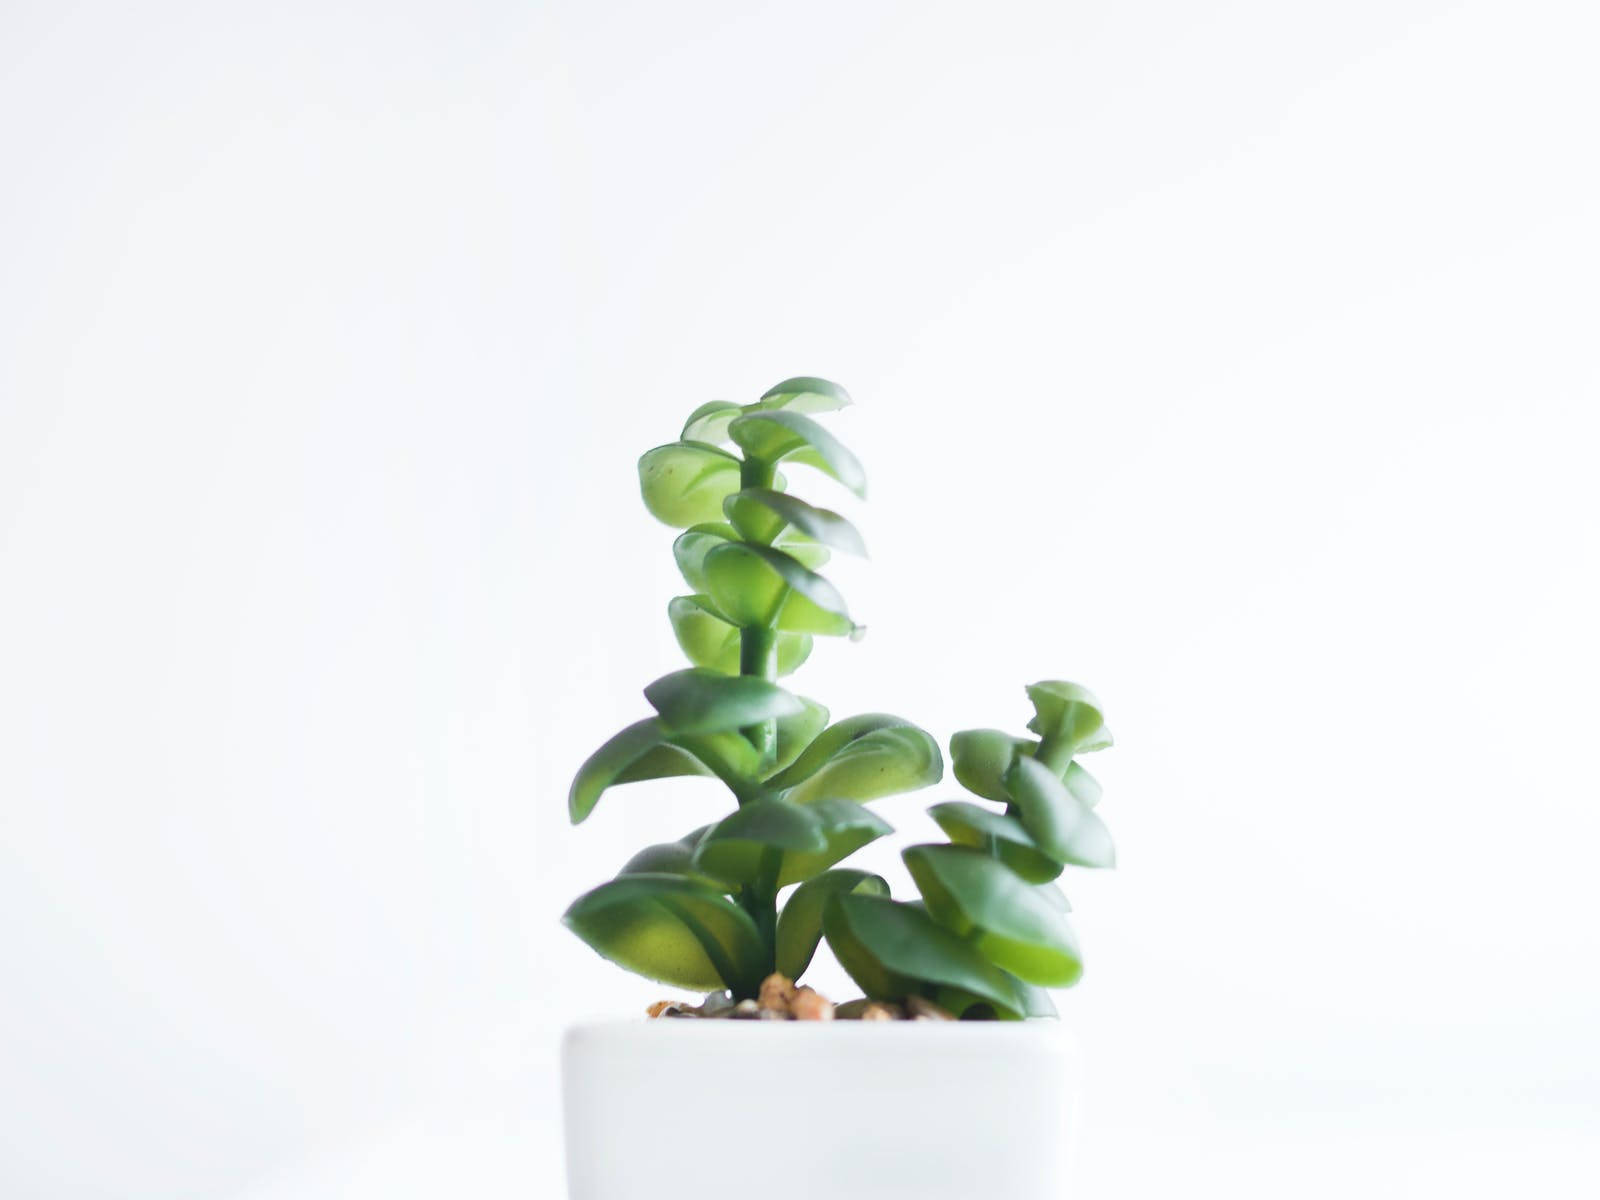 4k White Background With Plant Wallpaper